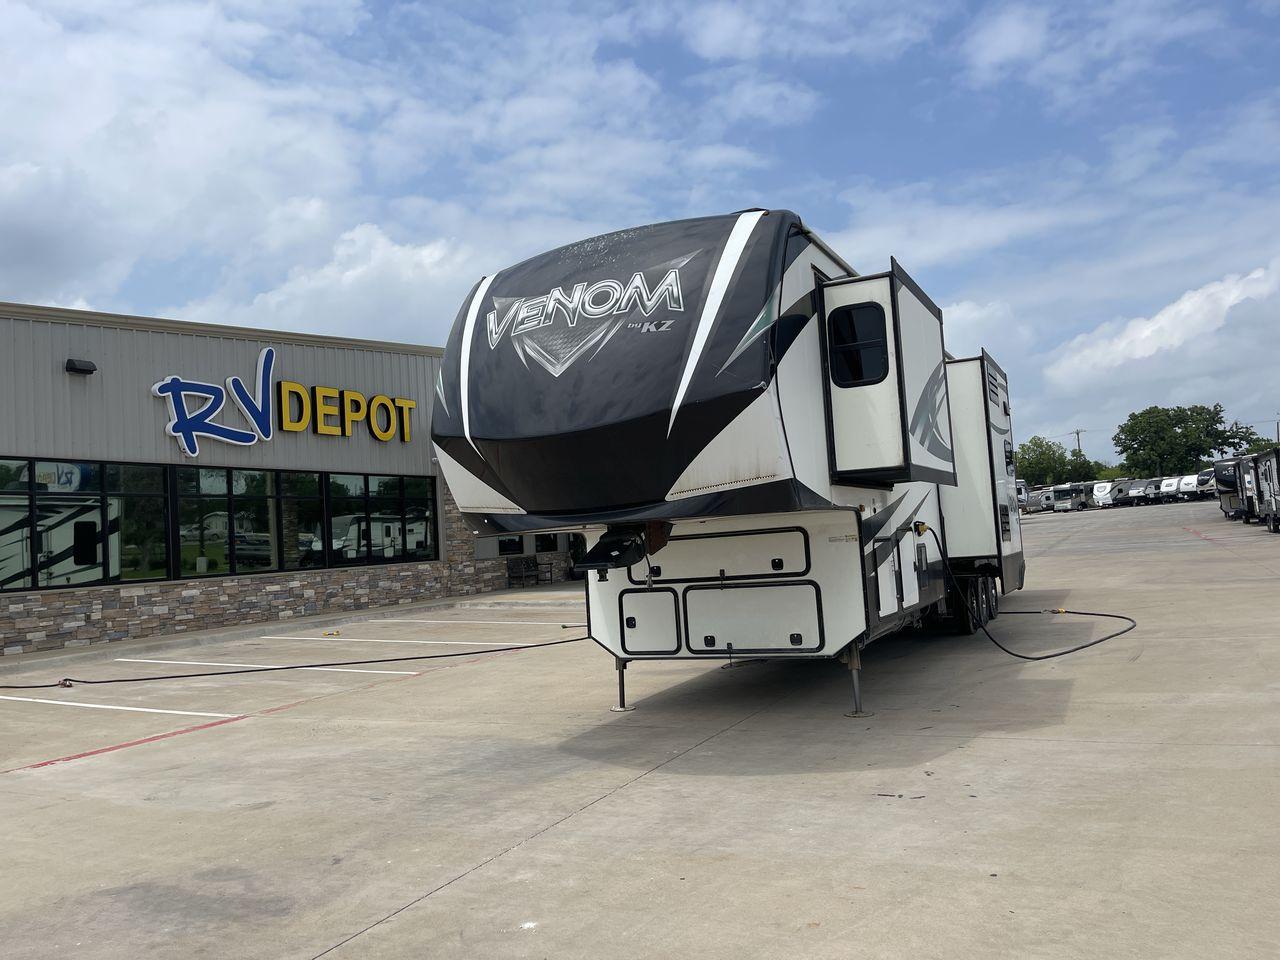 2017 BLACK VENOM 4013TK - (4EZFH4039H6) , Length: 43.33 ft. | Dry Weight: 14,760 lbs. | Gross Weight: 19,000 lbs. | Slides: 3 transmission, located at 4319 N Main Street, Cleburne, TX, 76033, (817) 221-0660, 32.435829, -97.384178 - With the 2017 Venom 4013TK, you can enjoy the highest level of luxury and usefulness. This impressive fifth wheel is 43.33 feet long, so it has plenty of room for your living space and storage for all your camping stuff. It is the right mix of strength and ease of towing, with a dry weight of 14,760 - Photo #0